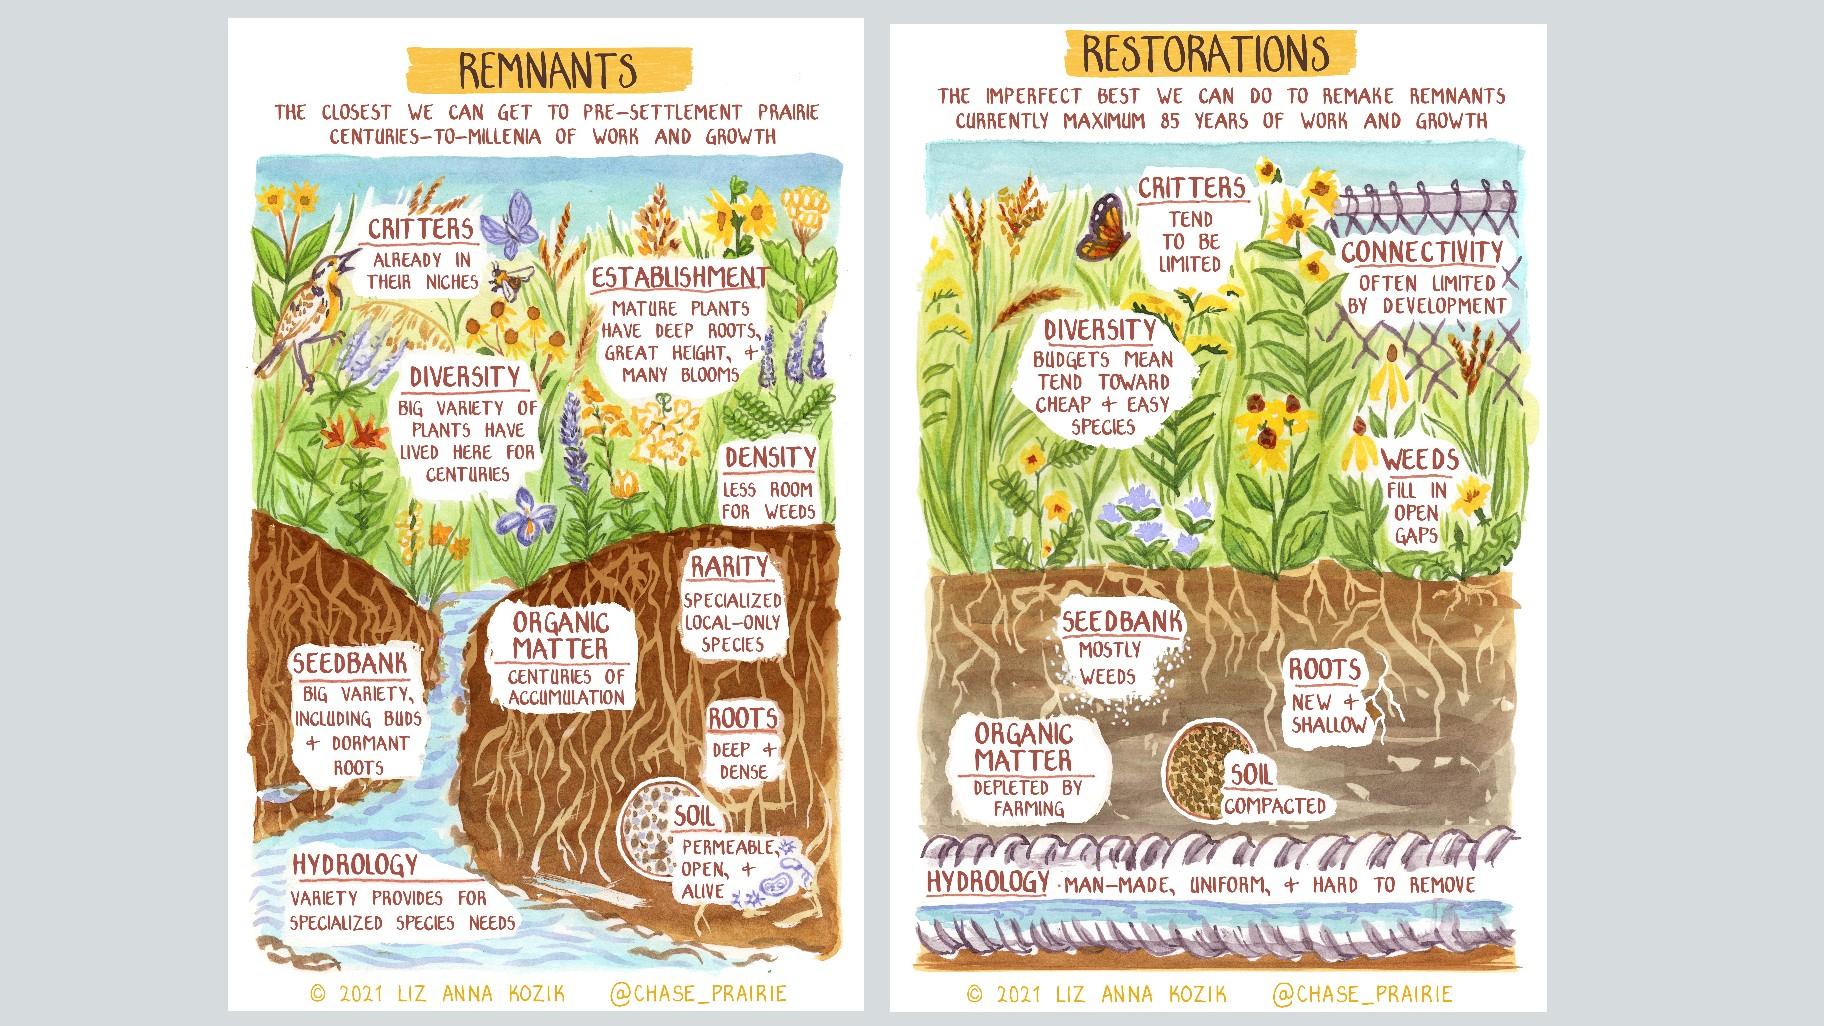 Environmental studies scholar Liz Anna Kozik creates comics that depict and explain the history of prairies and their restoration. Here she illustrates the differences between prairie remnants and restoration. (Courtesy of Liz Anna Kozik)